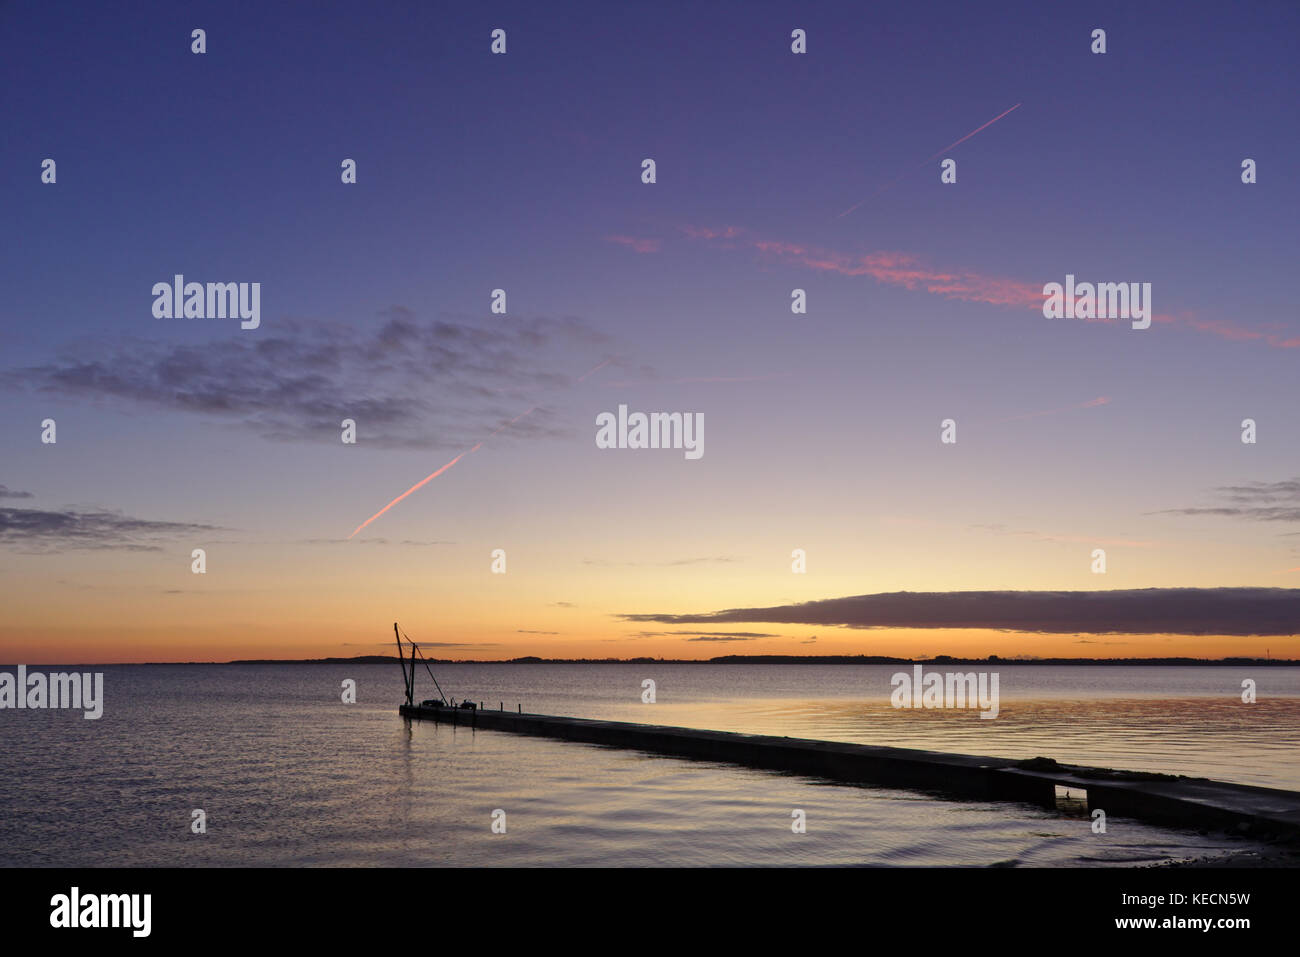 Pier before sunrise with small crane silhouetted against the morning sky and bright red vapor trail overhead Stock Photo